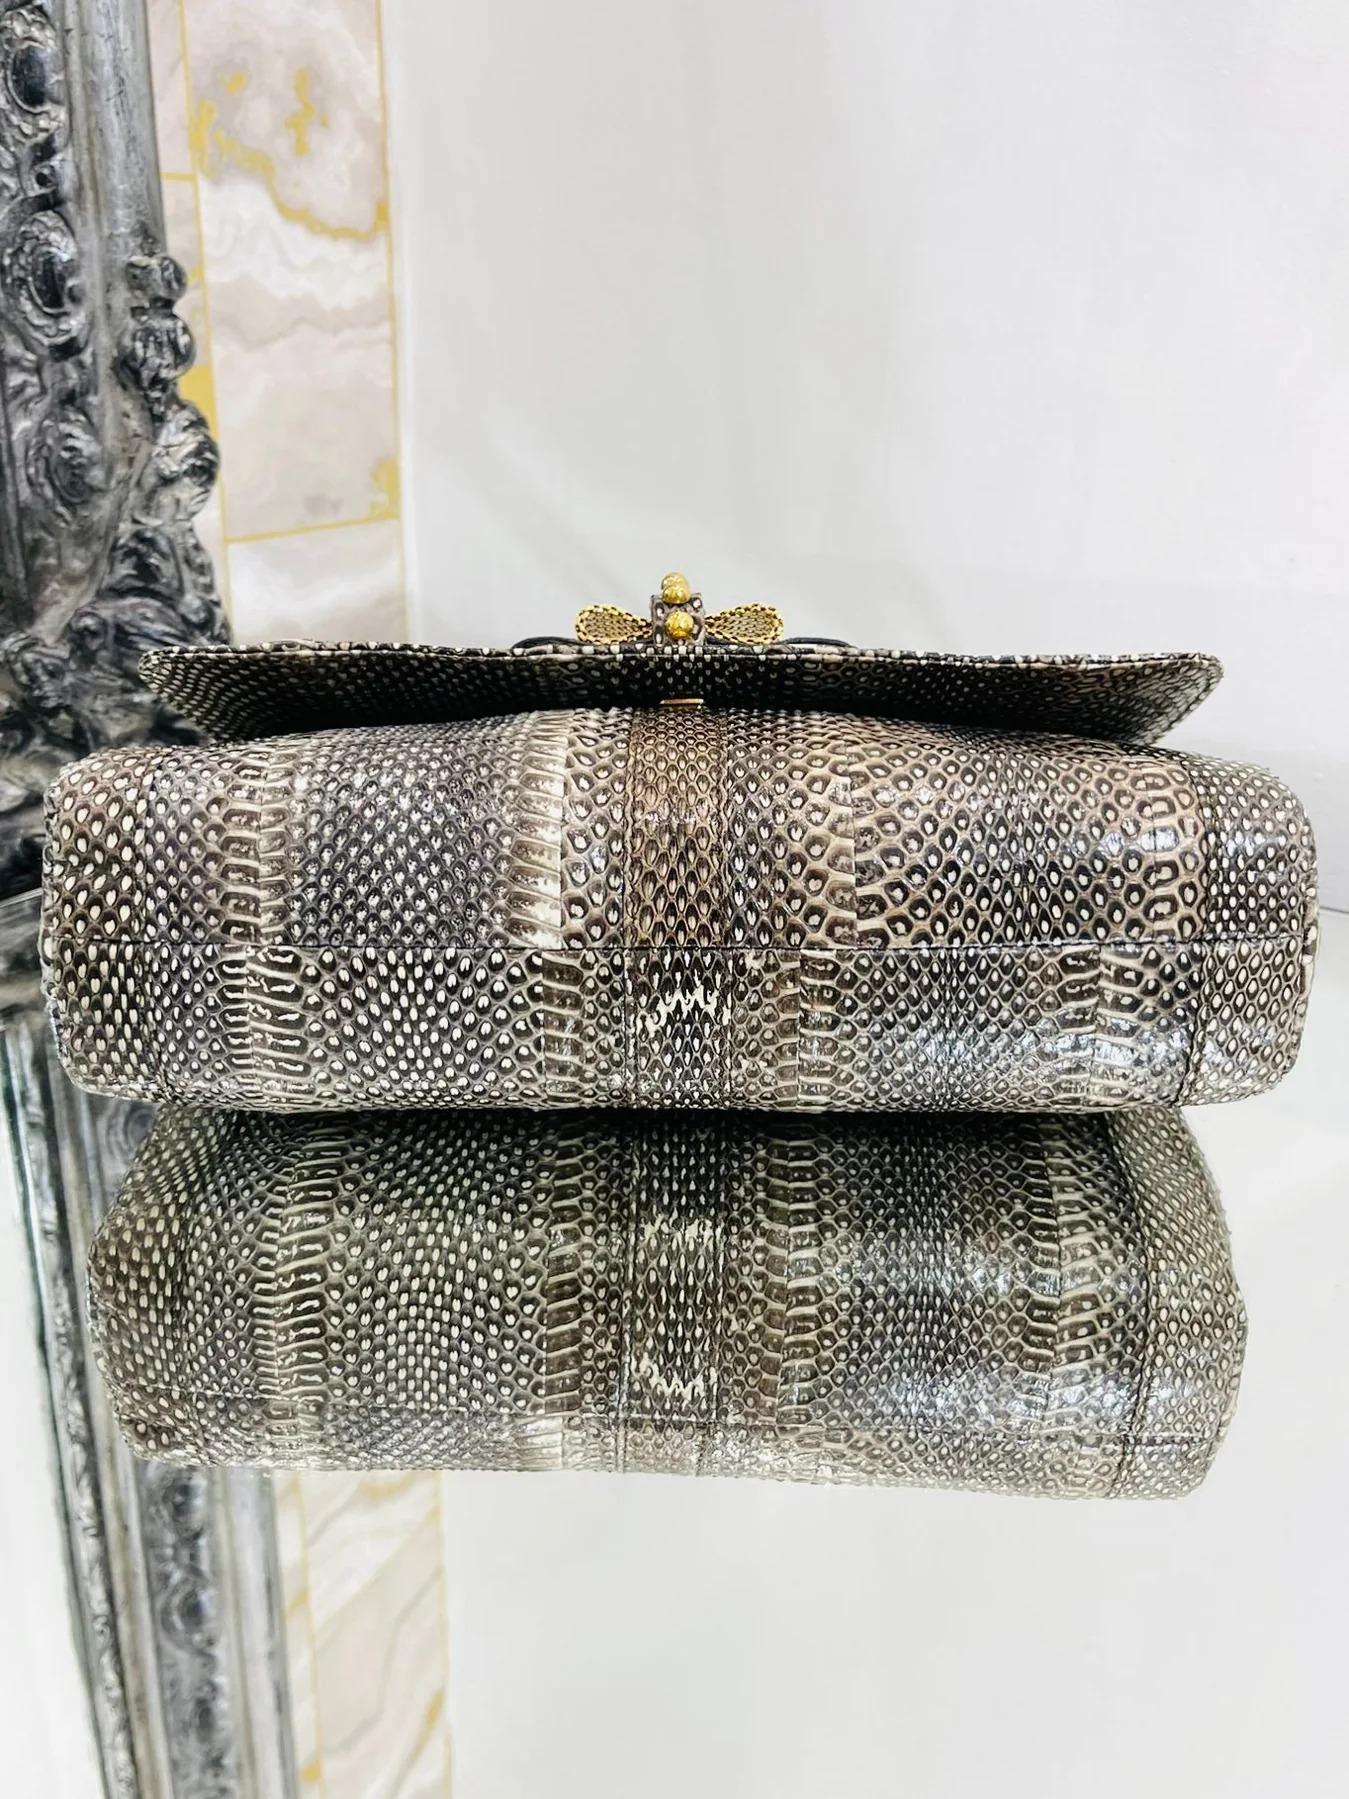 Christian Louboutin Python Skin Sweet Charity Bag In Excellent Condition For Sale In London, GB